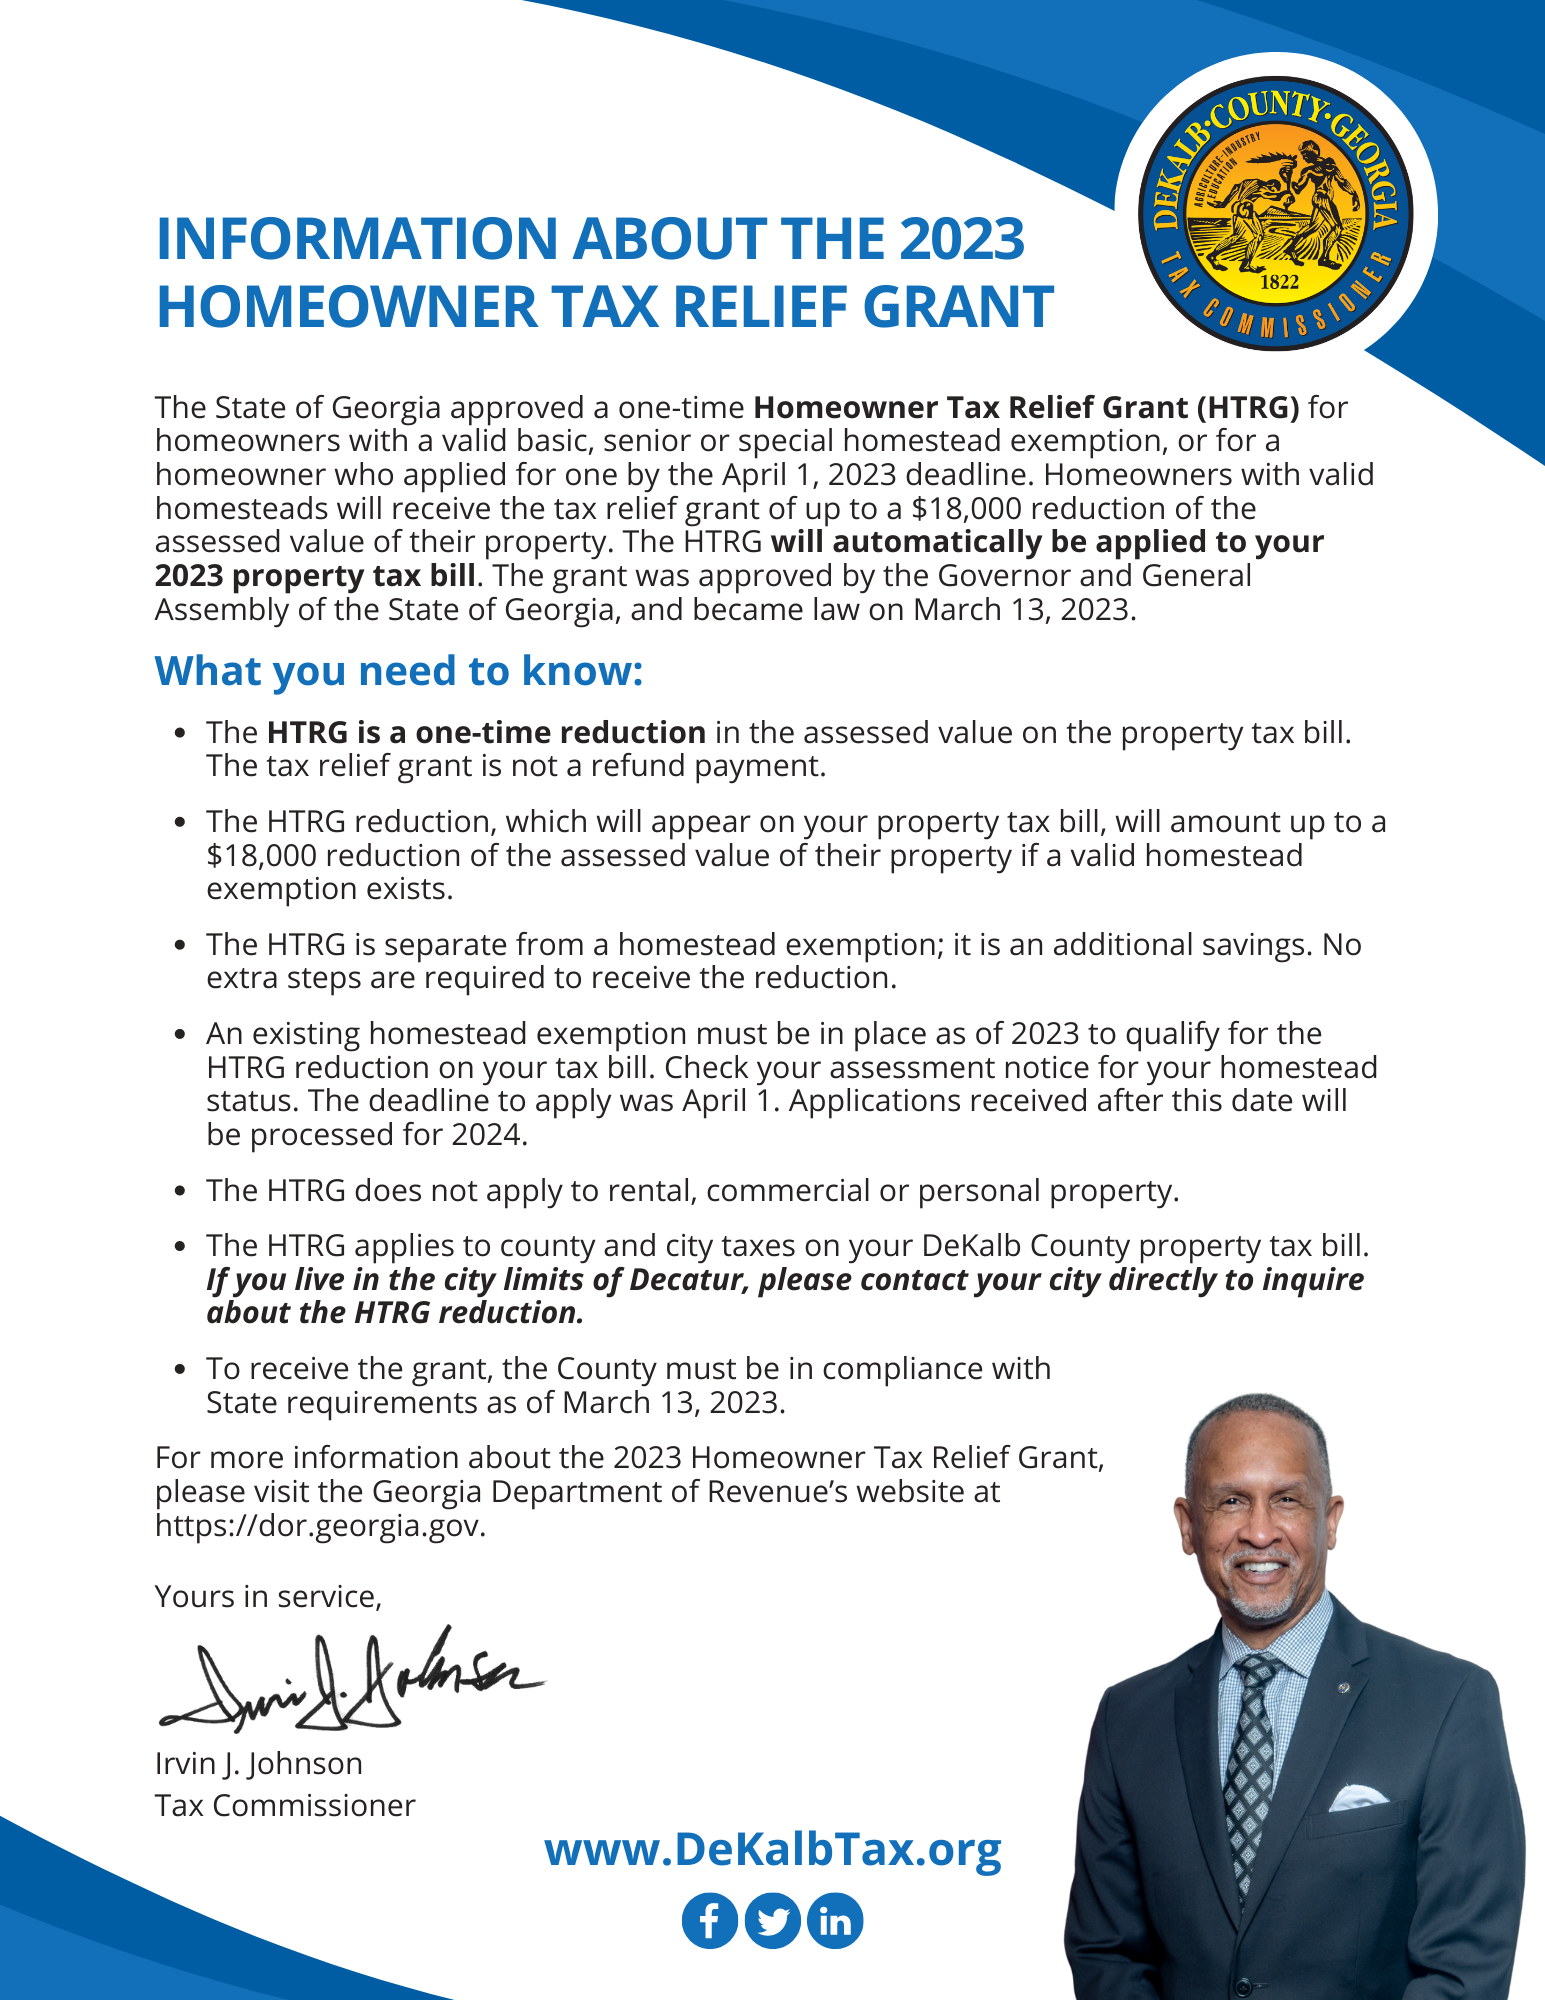 2023 Homeowner Tax Relief Grant